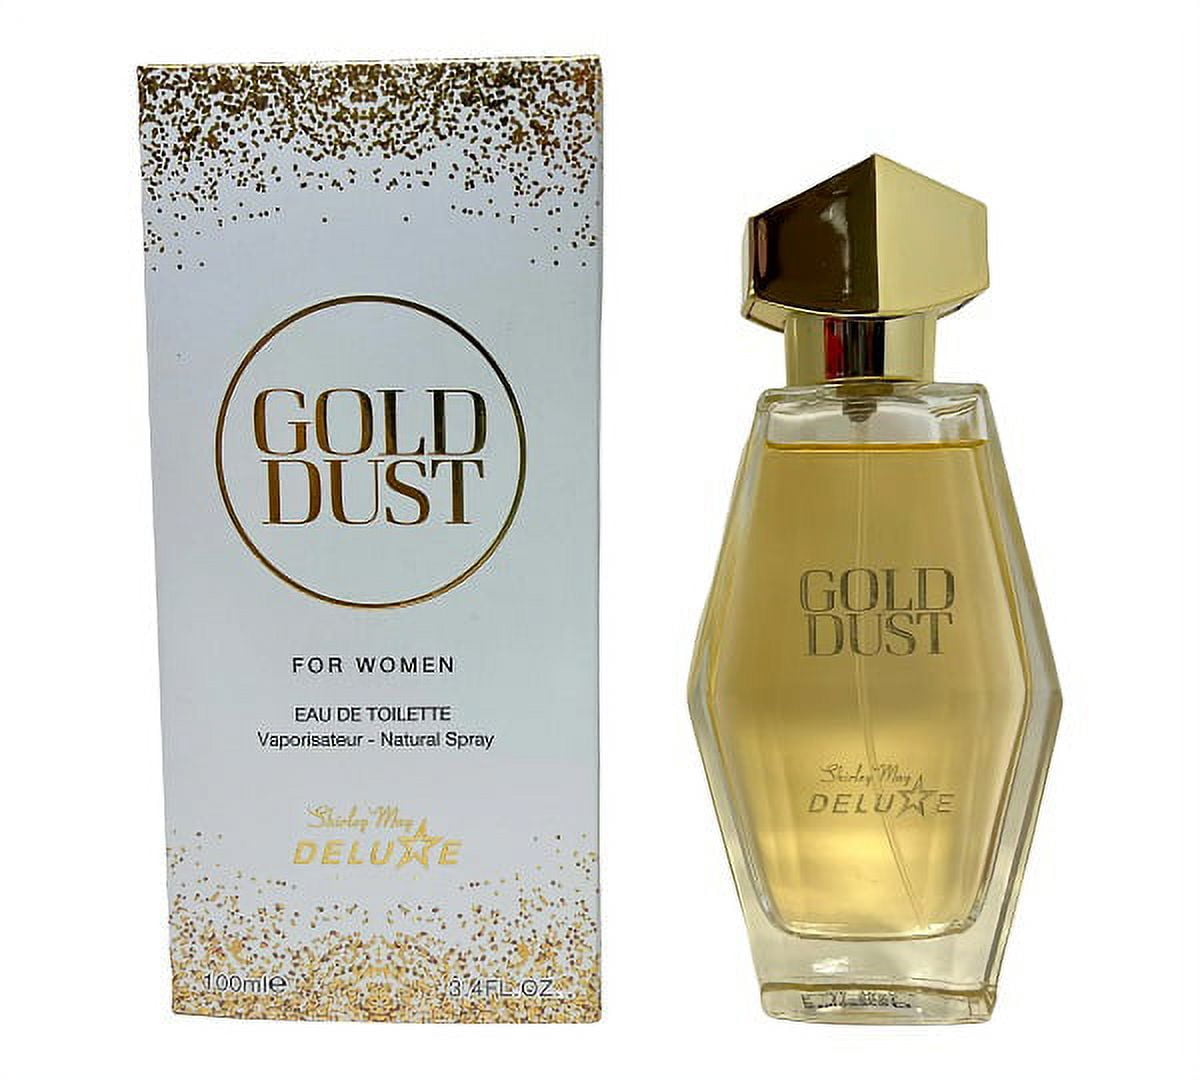 GOLD DUST women's designer EDT perfume 3.4 oz by SHIRLEY MAY DELUXE 